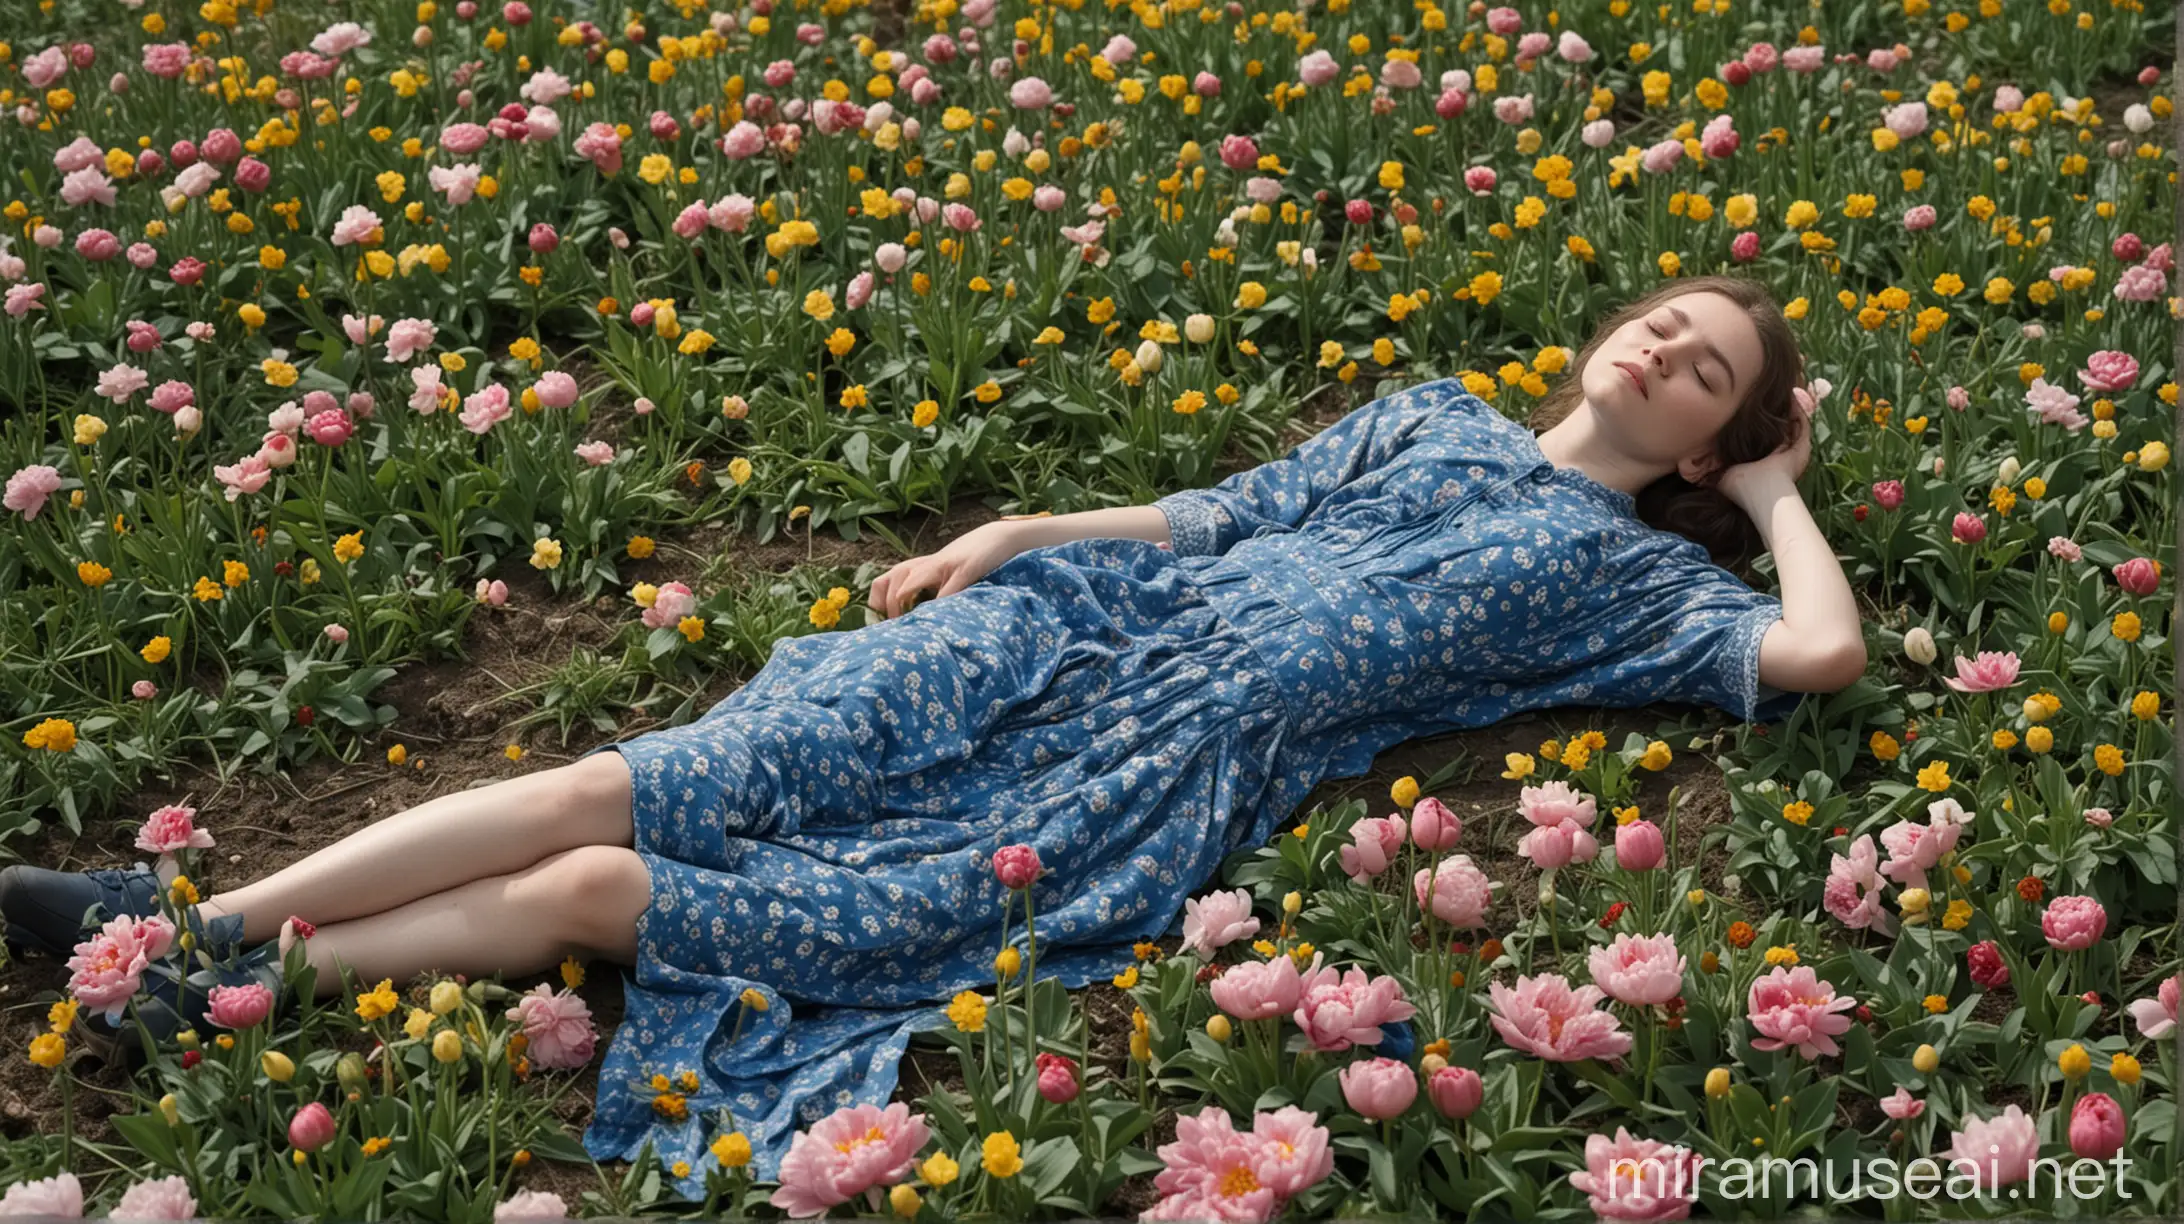 Melancholy in Springtime Lena in a Floral Dress Amidst Blooming Peonies and Daffodils